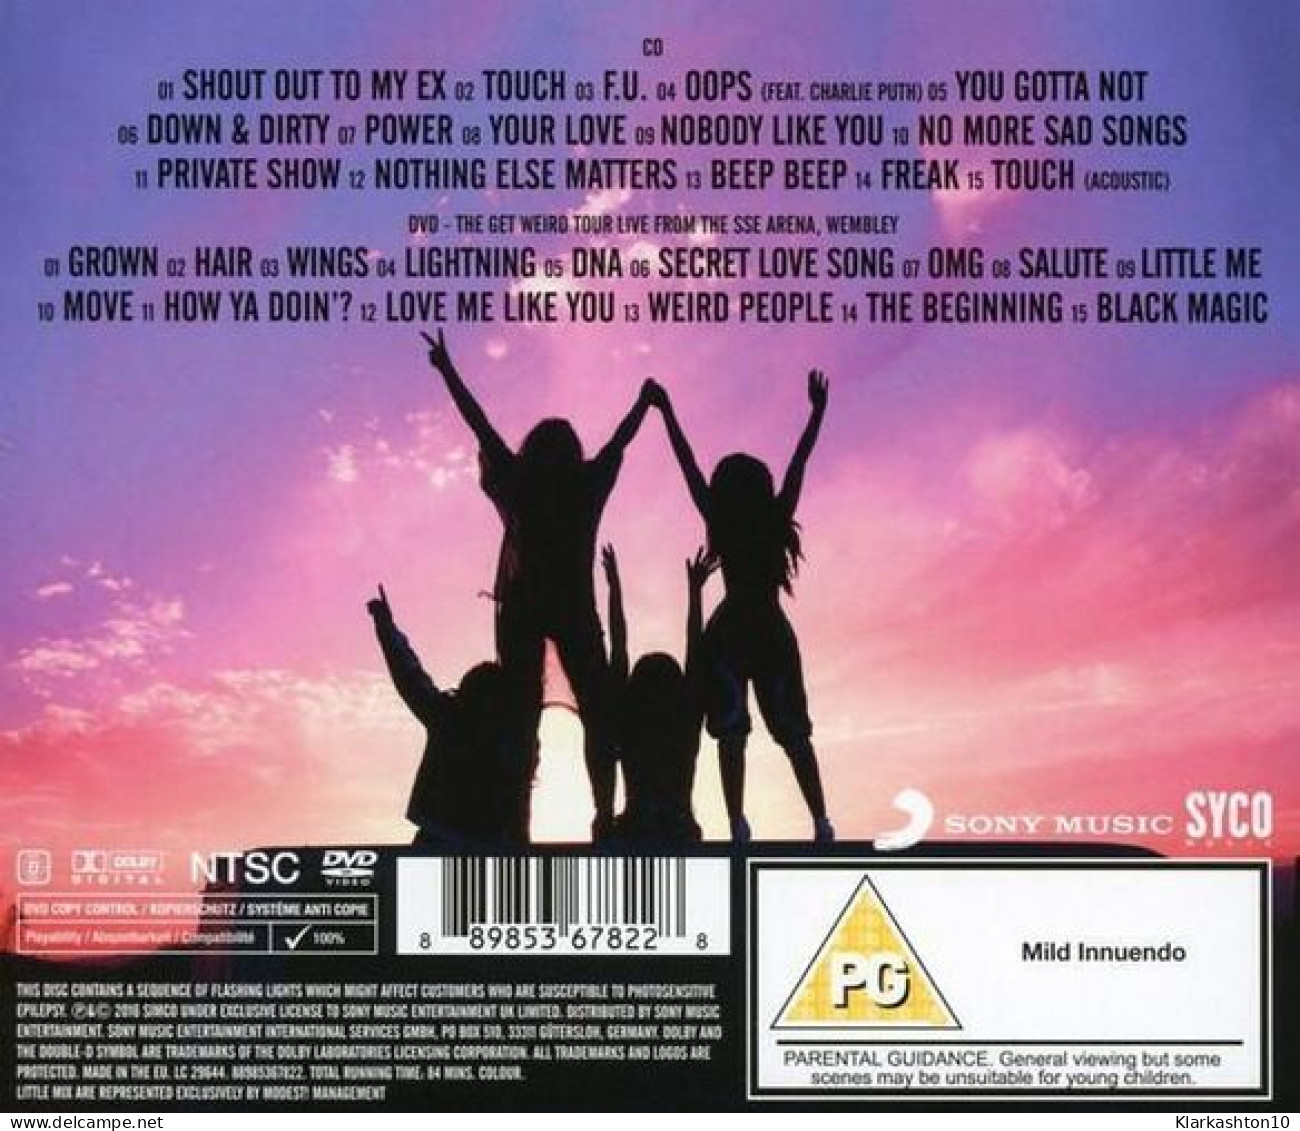 Glory Days (CD/Dvd Deluxe Edition) - Other & Unclassified